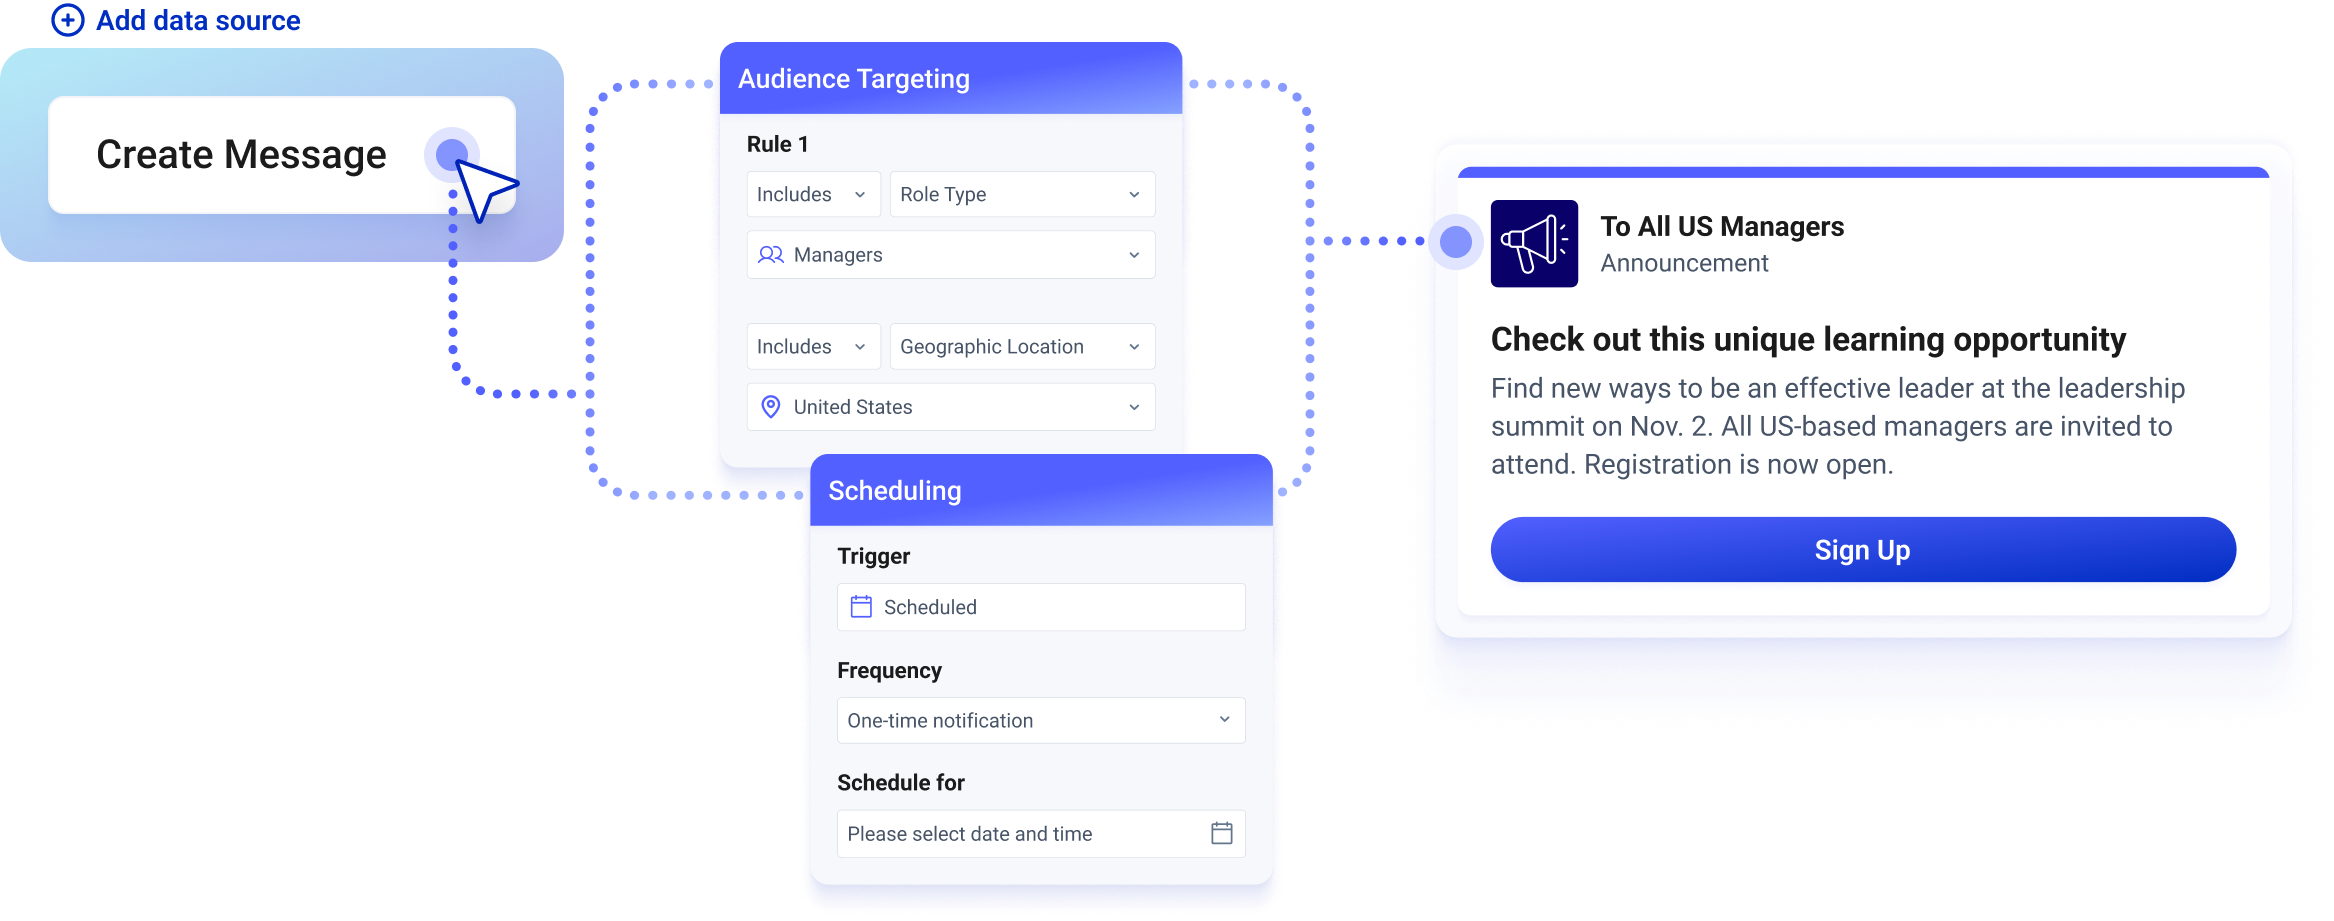 Workgrid's enterprise-grade platform allows you to build conversational AI experiences, create employee journeys, and make digital workplace apps available to employees